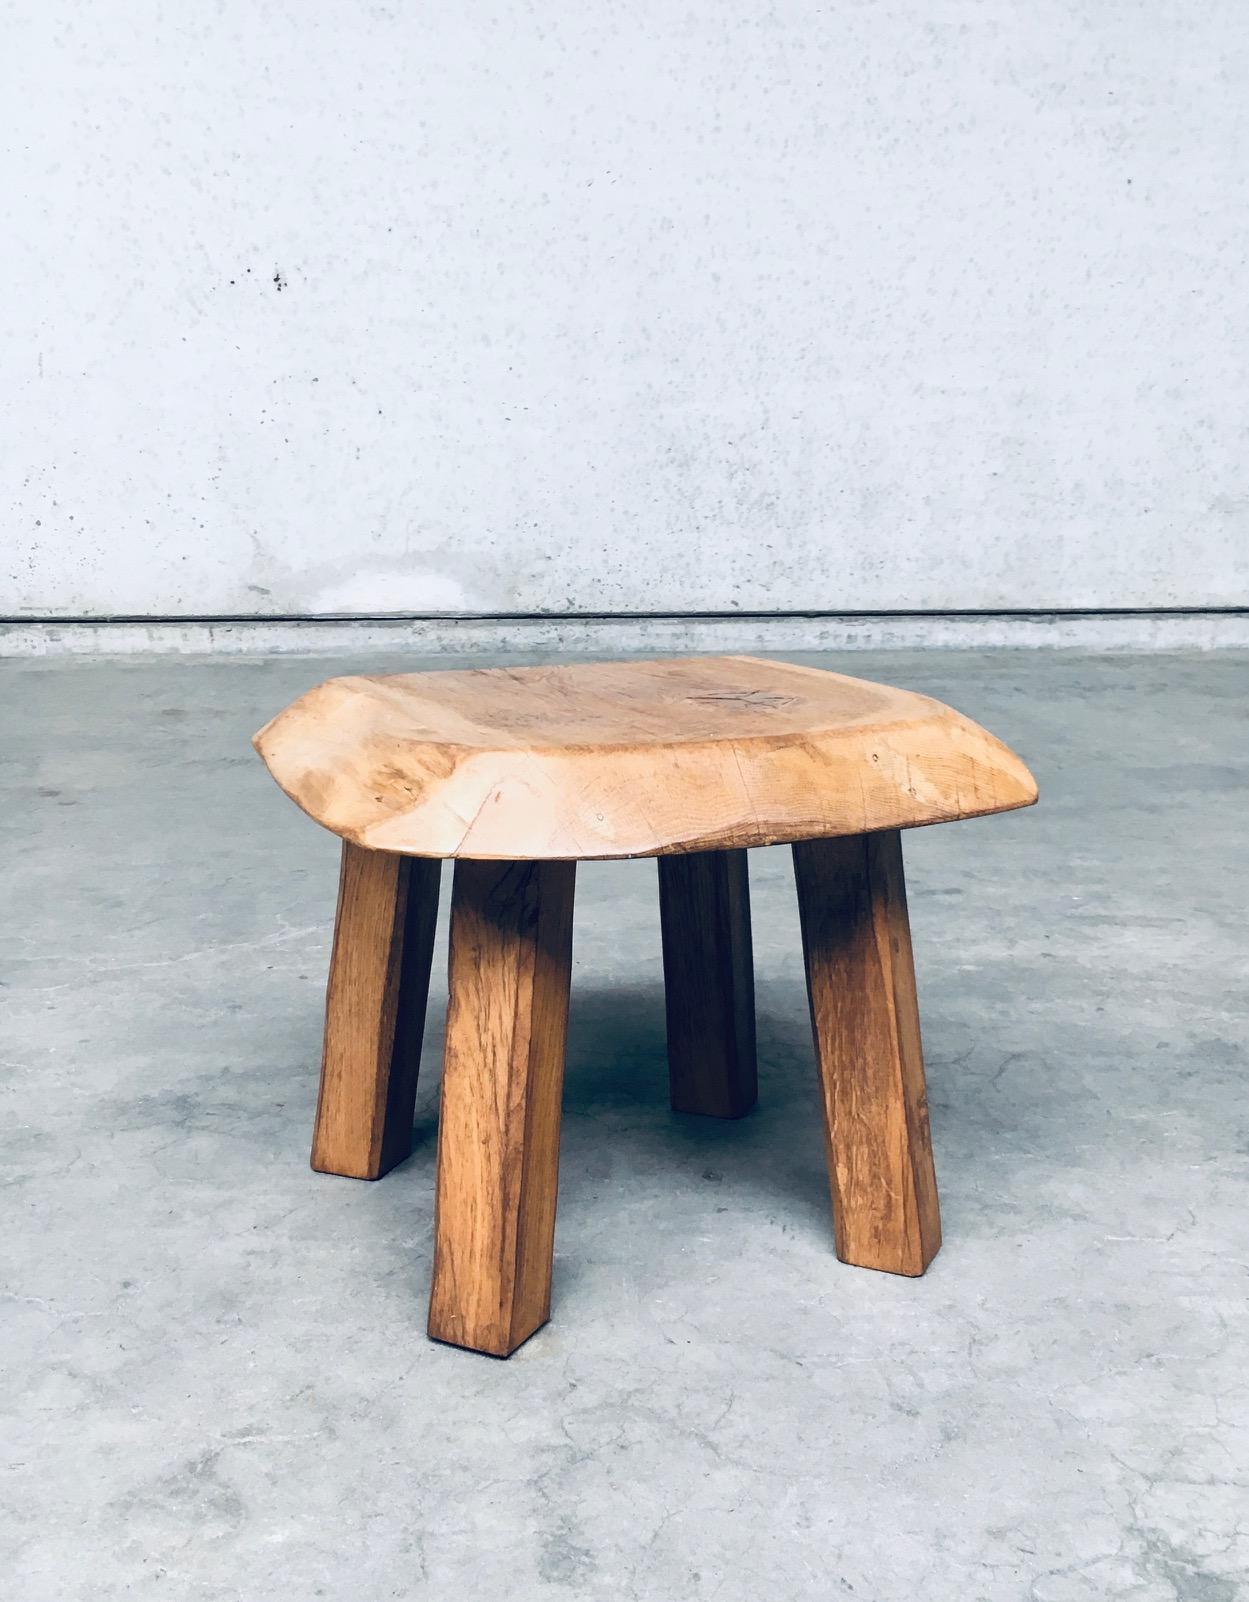 Vintage Wabi Sabi Style Brutalist in Design Oak Side Table. Made in the Netherlands, 1960's. Solid light colored oak constructed small side table. Carved thick oak slab as top with 4 chunky carved legs. This comes in very good, all original